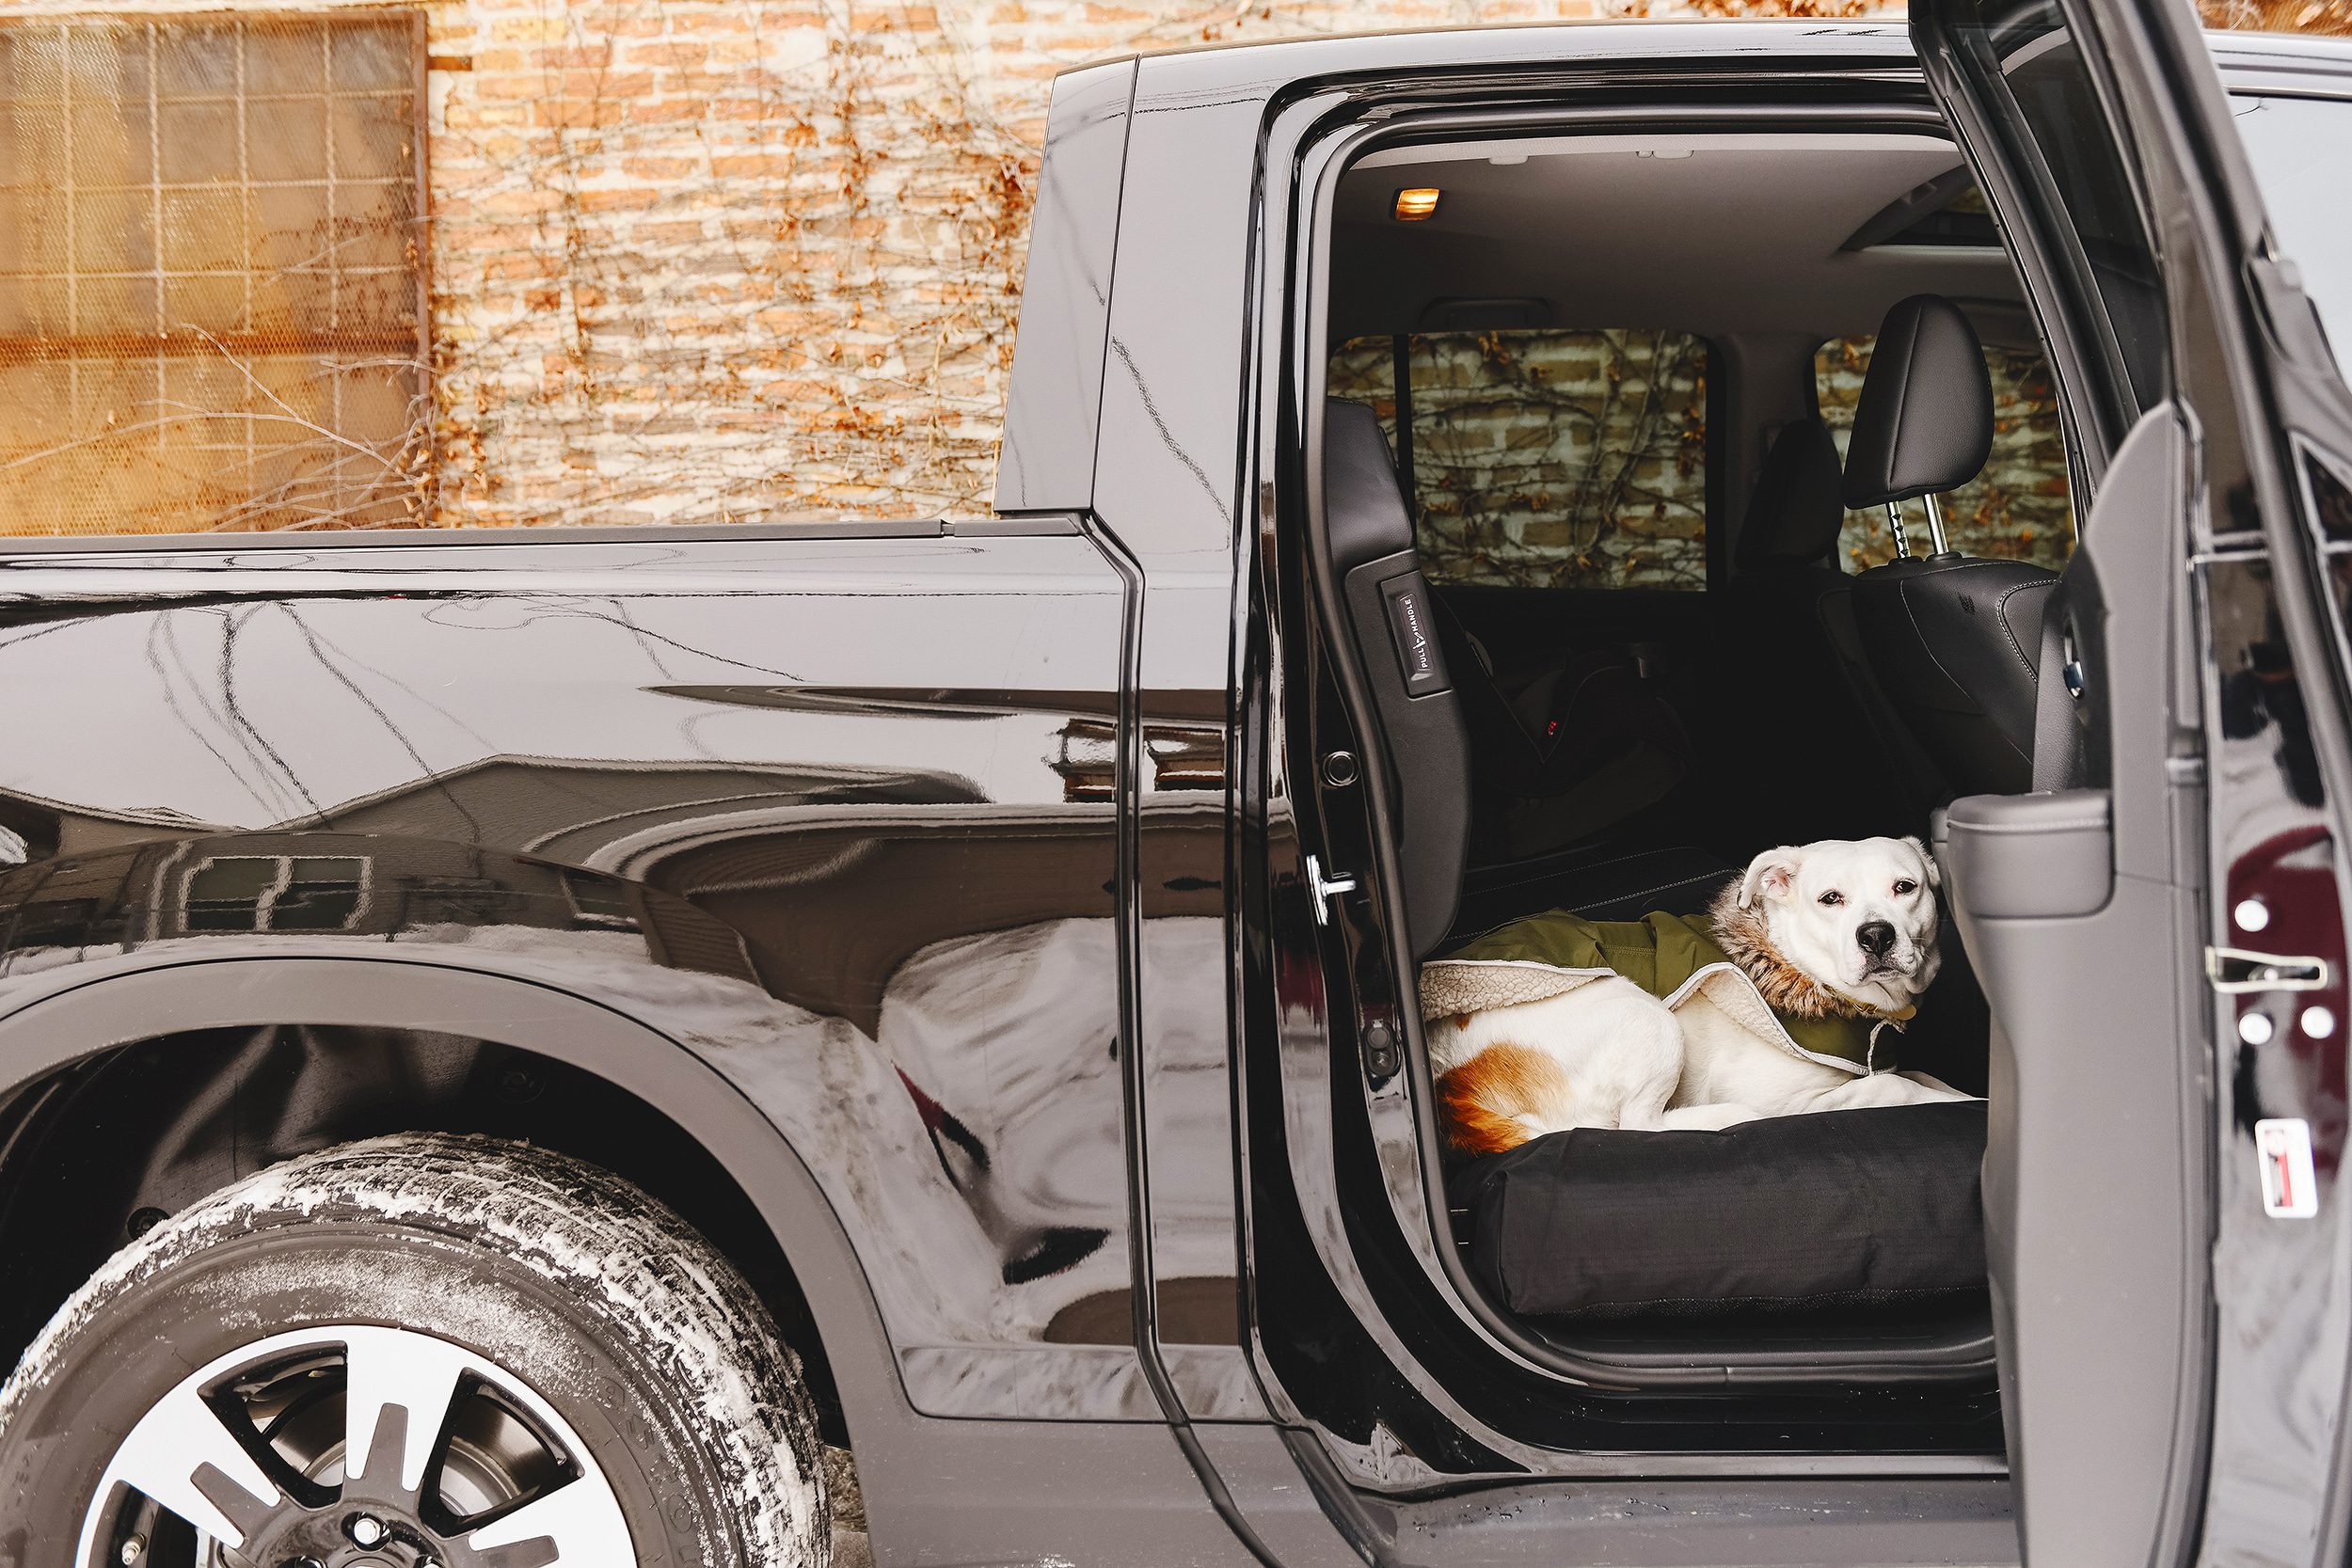 Our dog, Catfish, sits on her bed in the back of our black Honda Ridgeline pickup truck // via Yellow Brick Home